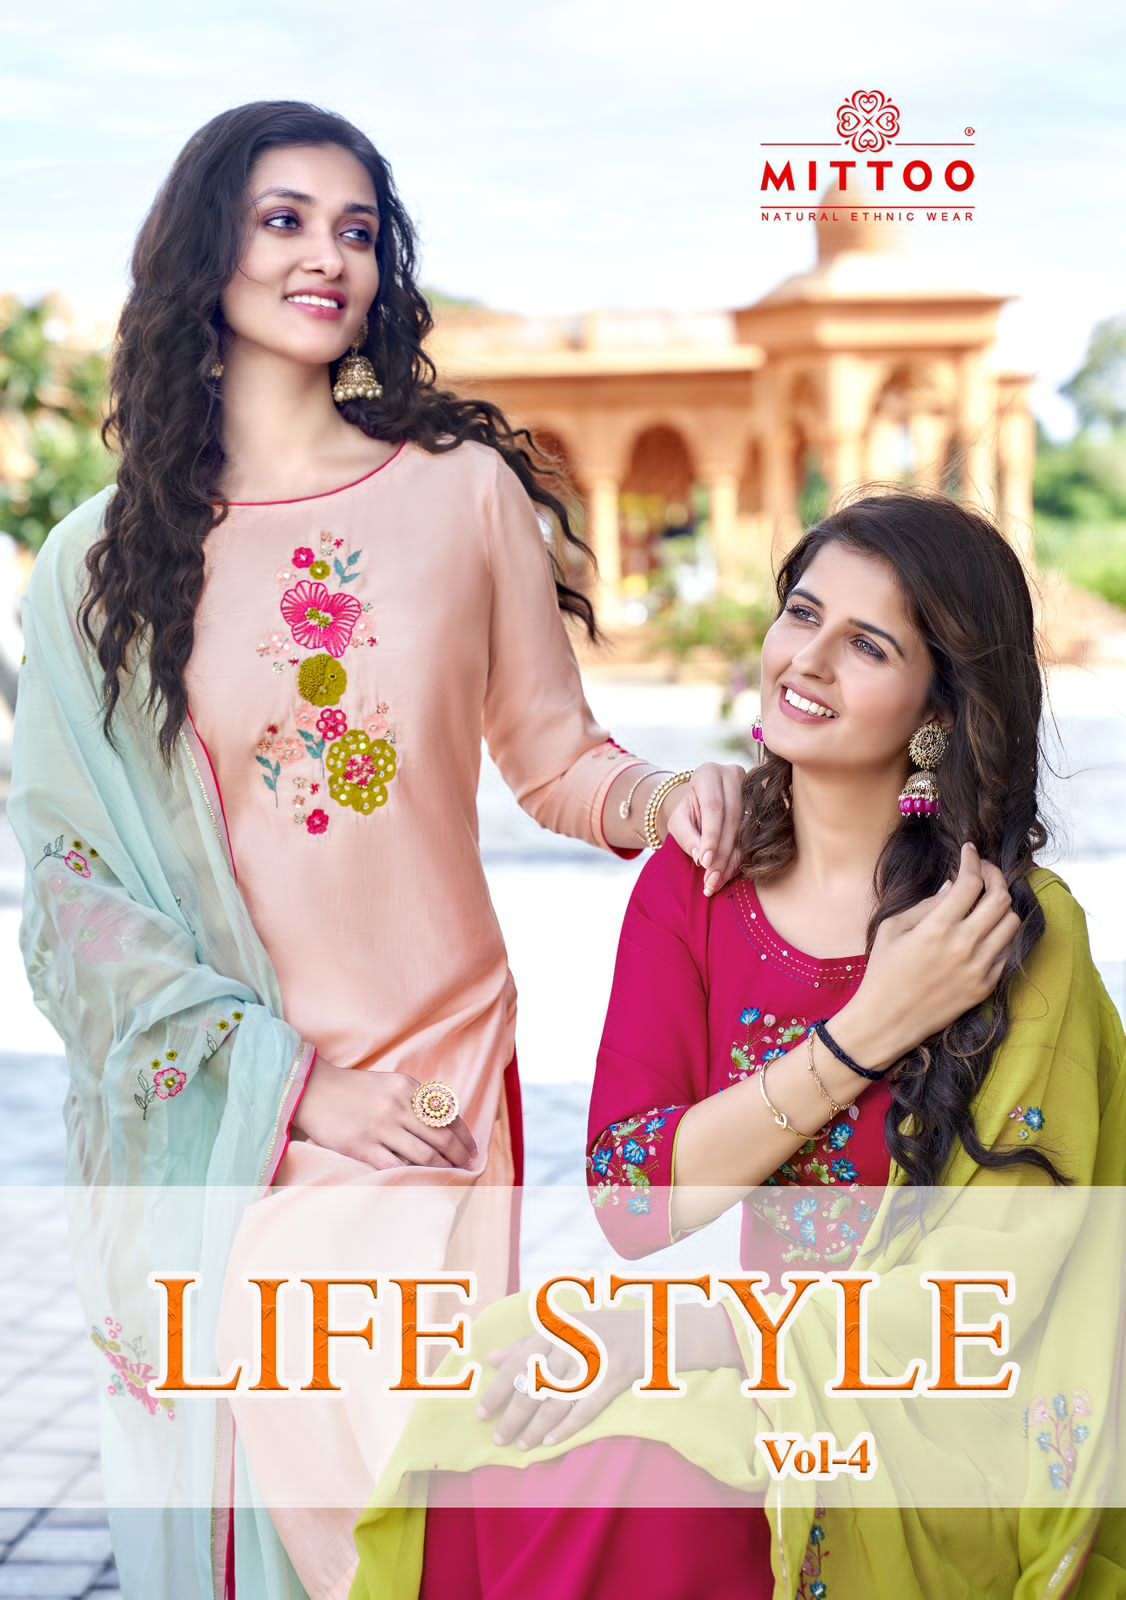 mitto life style vol 4 series 1825-1830 Viscose Weaving readymade suit 